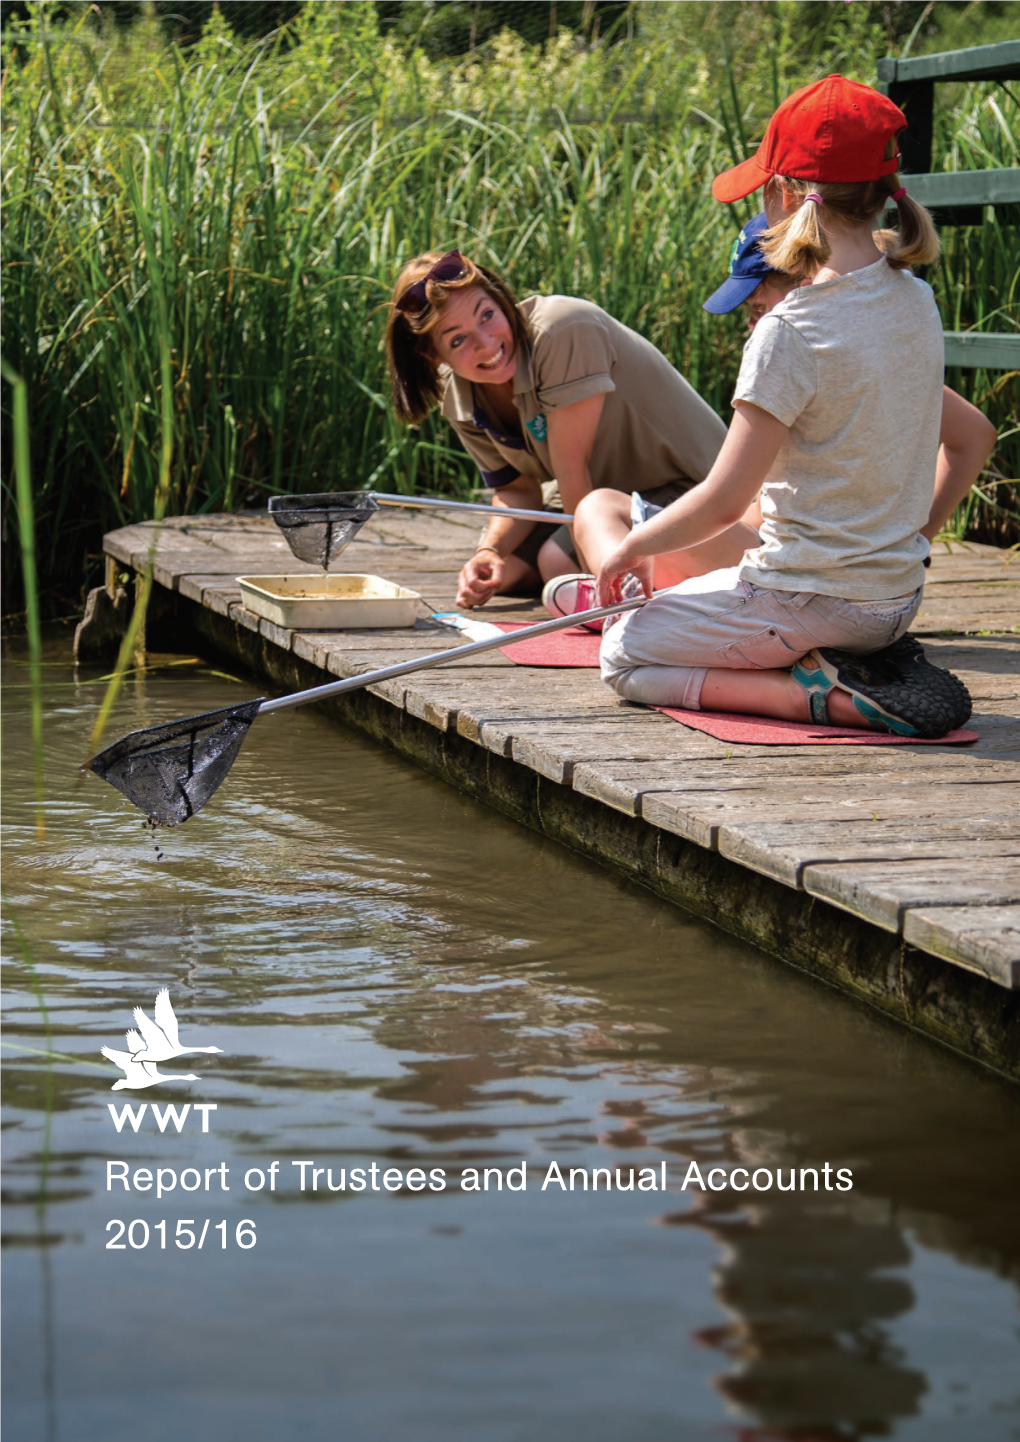 WWT Annual Report 2015/16